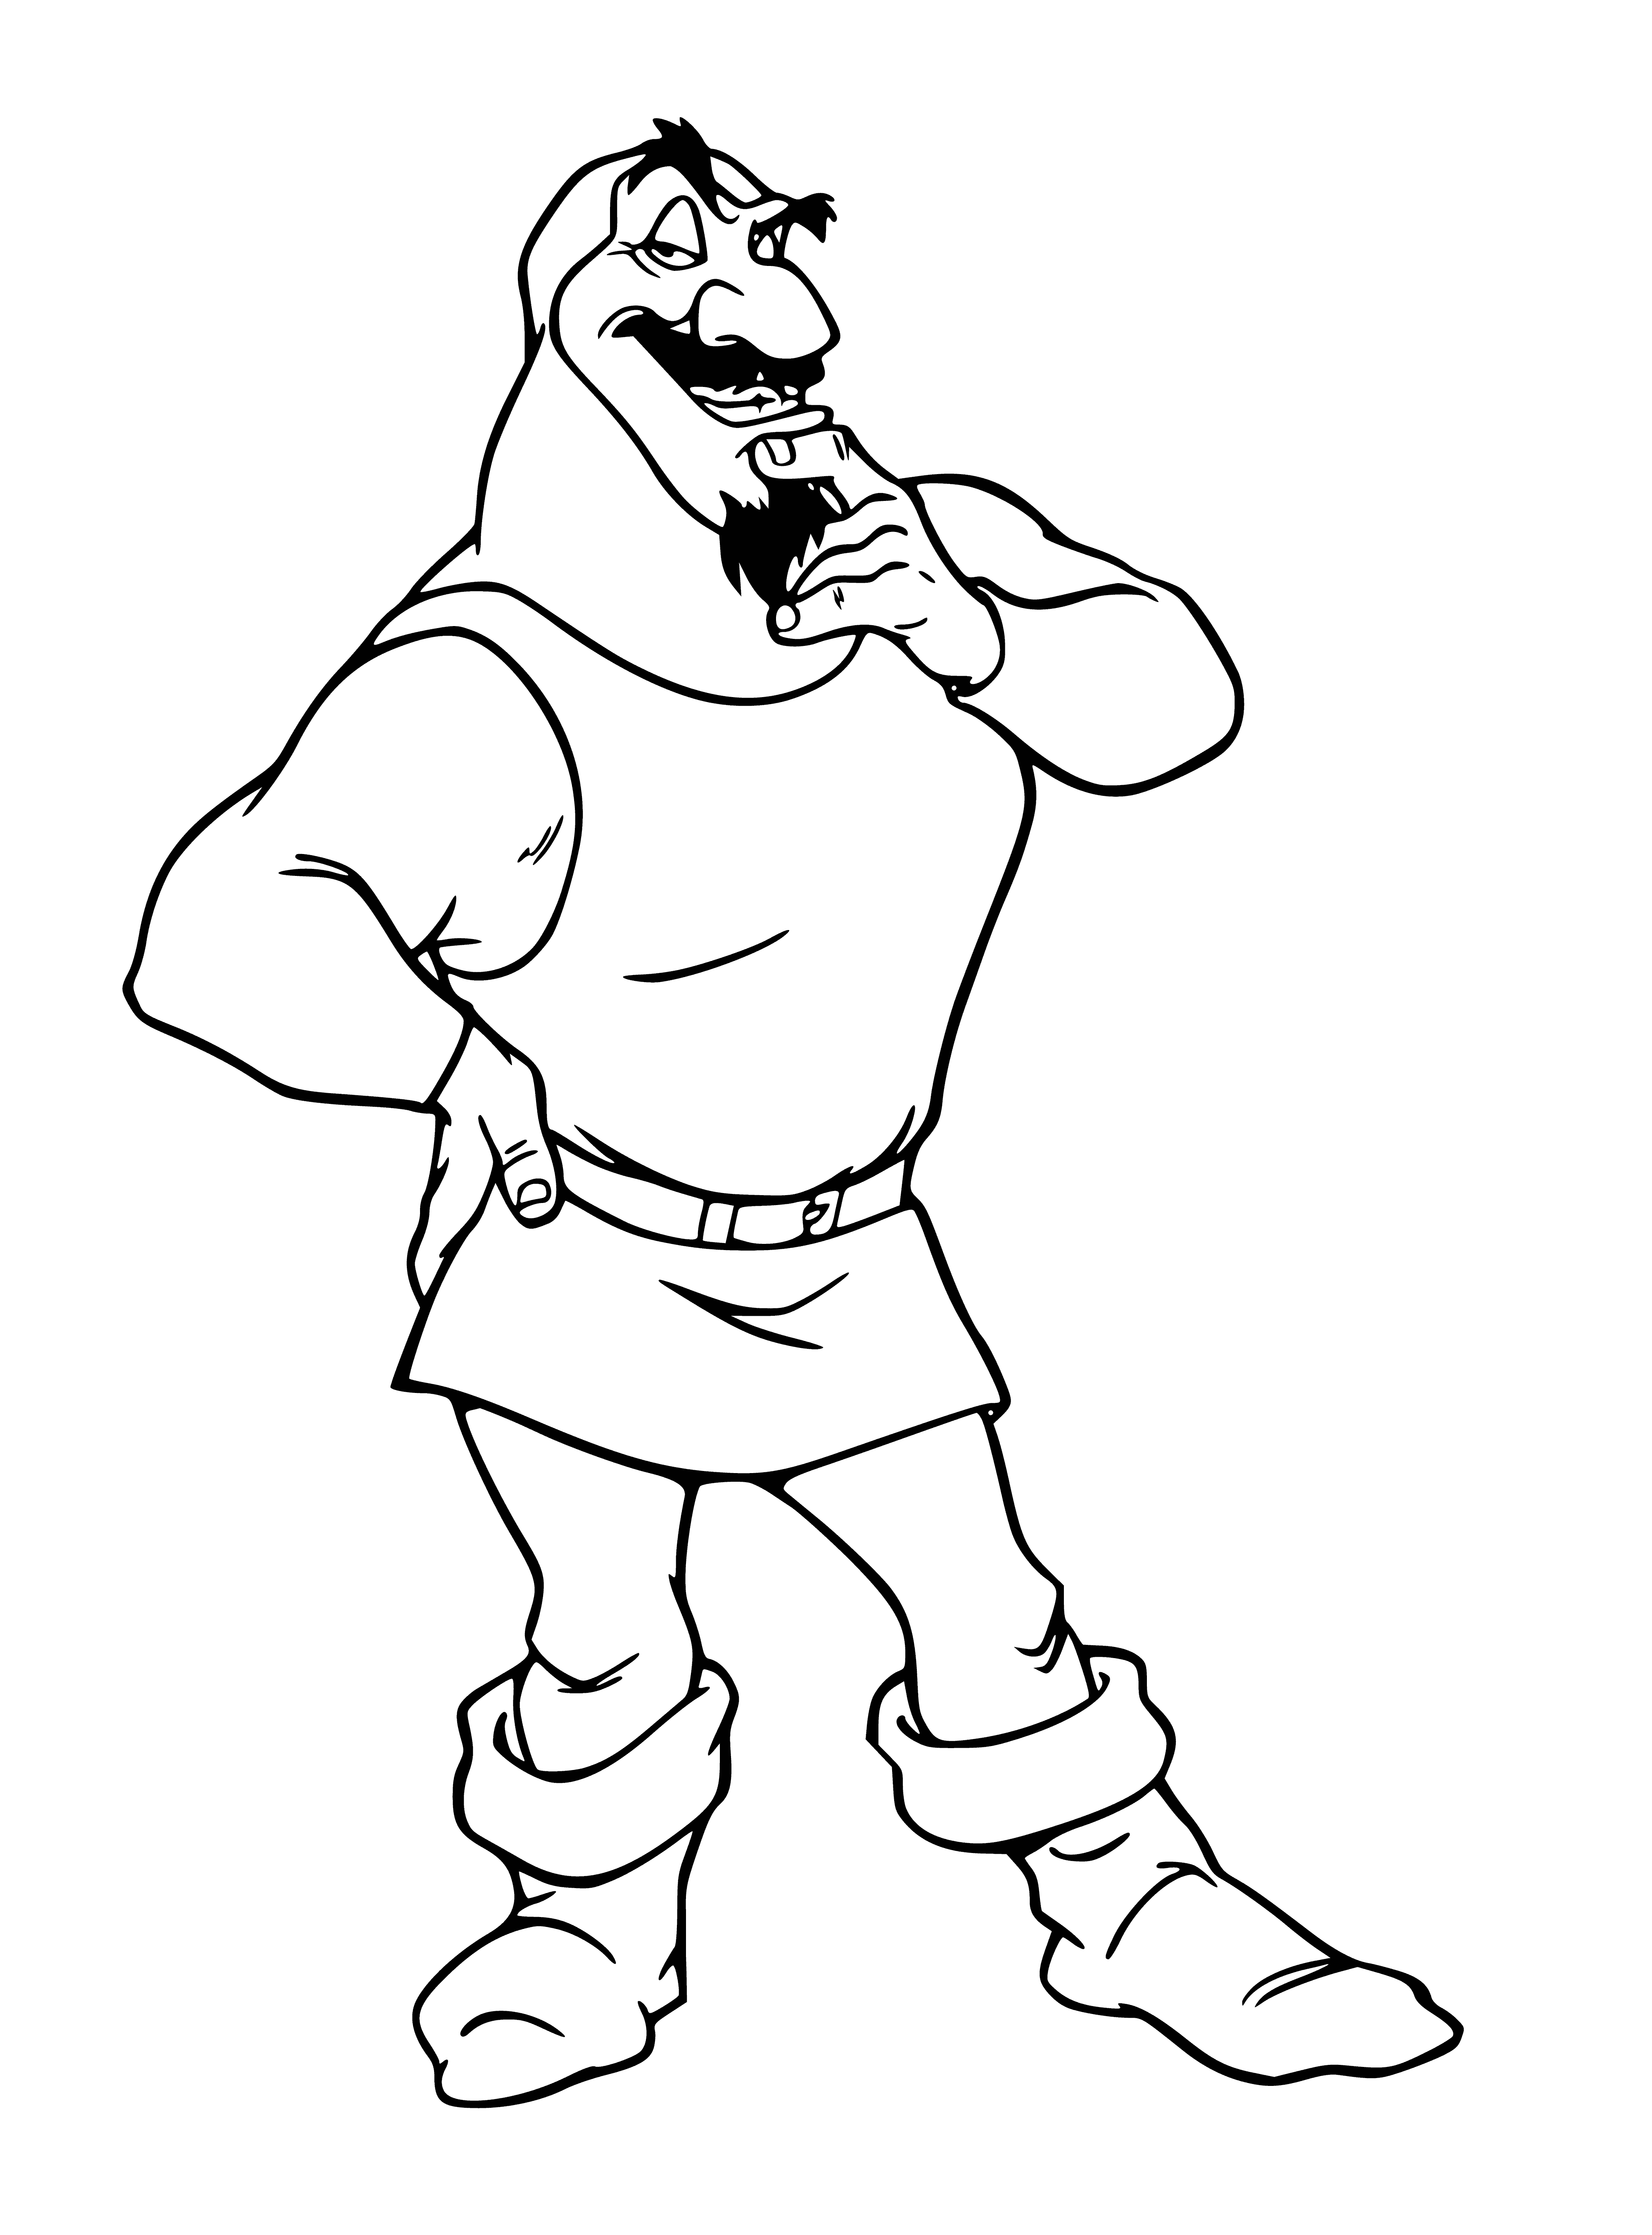 coloring page: The Gummi Bears are a gang of villains, armed with knives and guns, wearing dark clothing and menacing expressions.